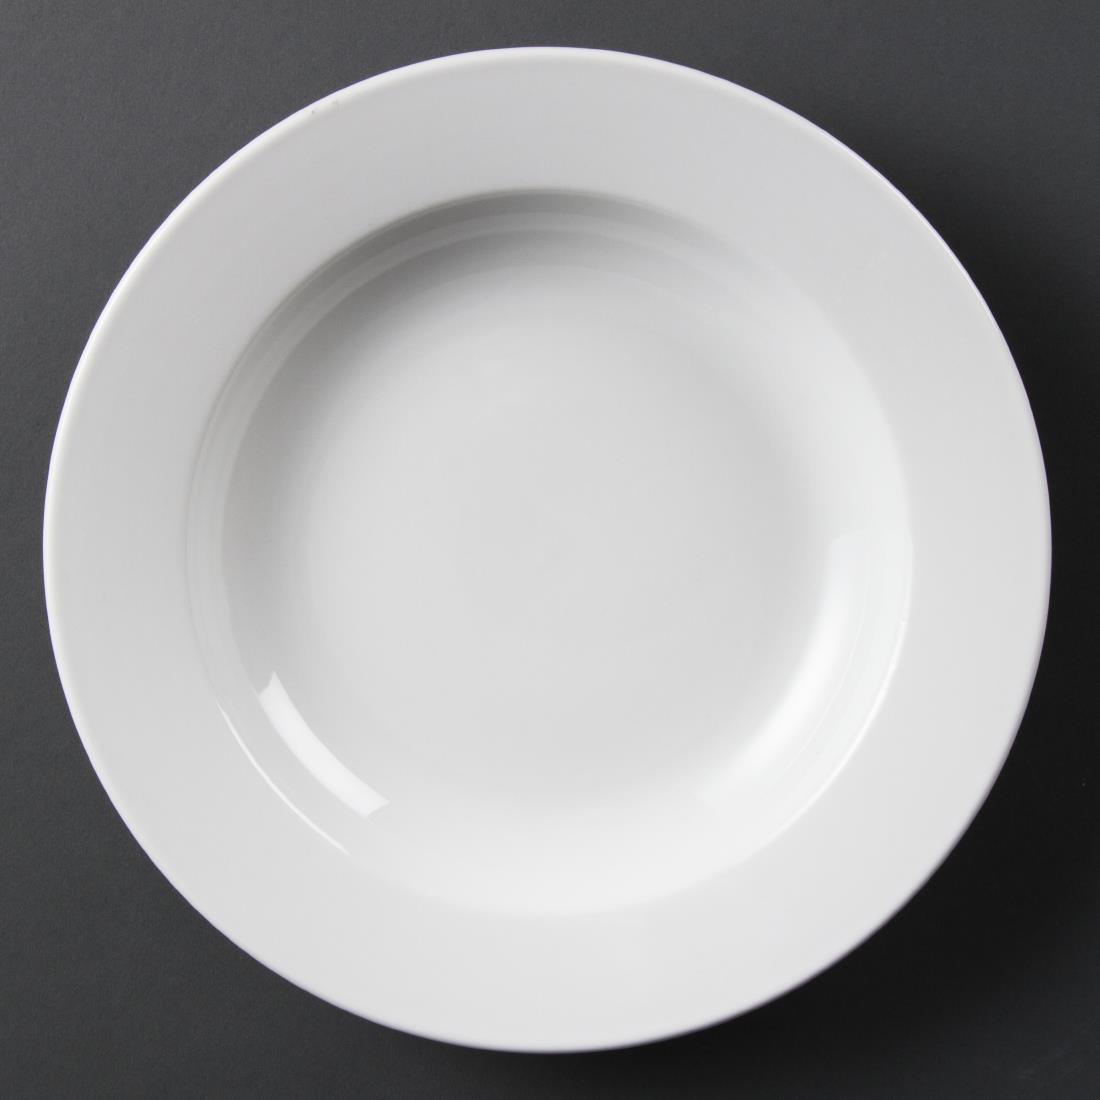 Olympia Whiteware Deep Plates 270mm 430ml (Pack of 6) - C363  - 2